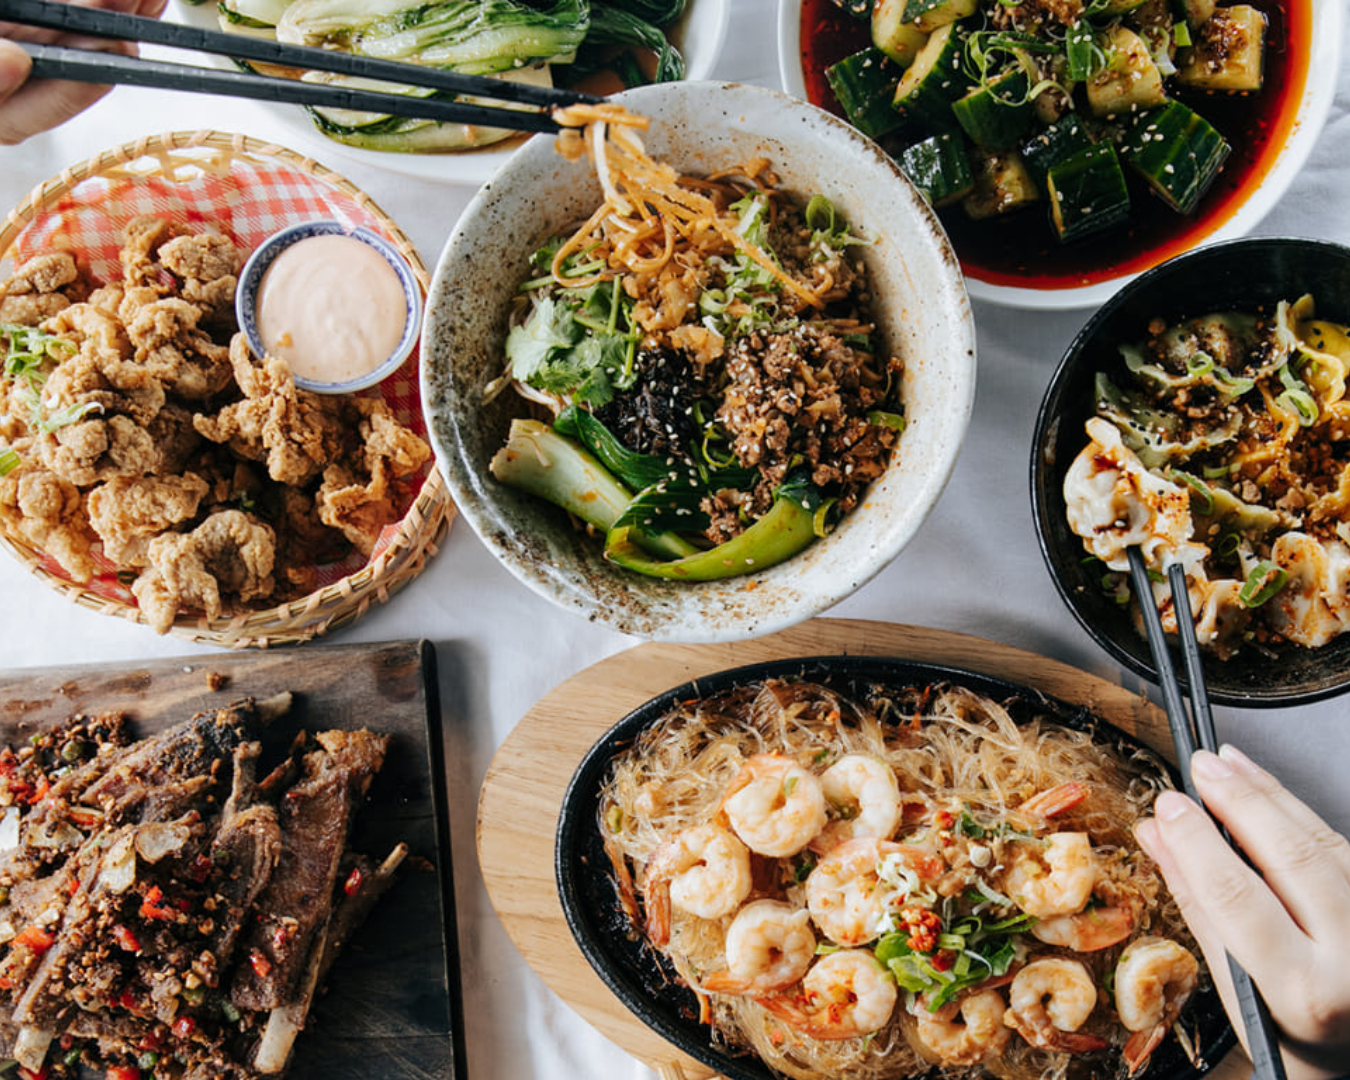 Two chopstick-wielding hands dig in to a delicious spread of spicy Sichuan dishes at Miss Peppercorn 